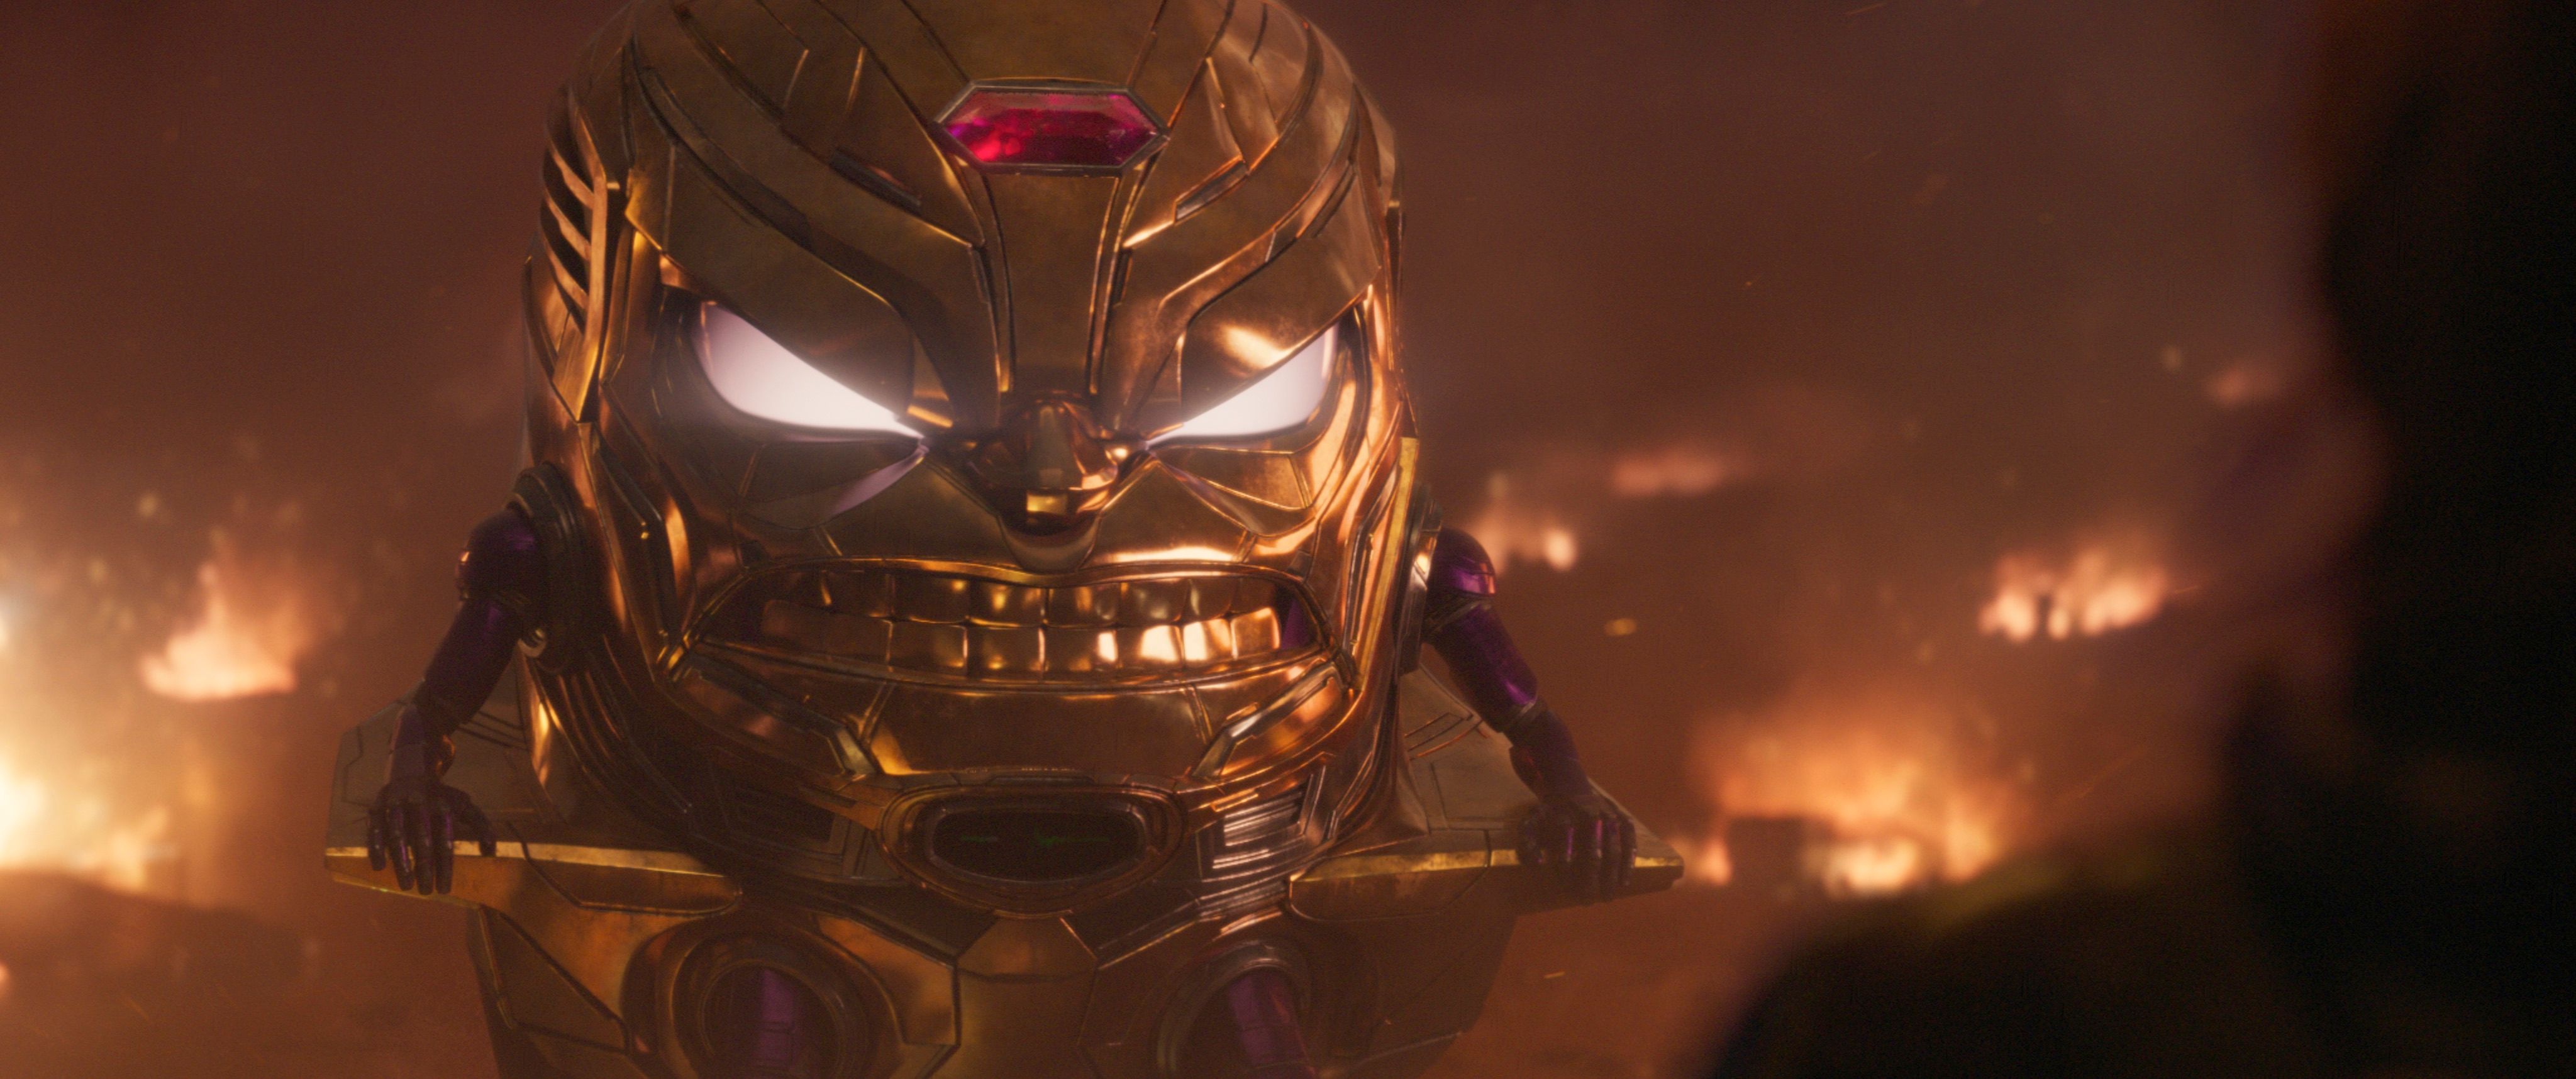 MODOK in Ant-Man and the Wasp: Quantumania